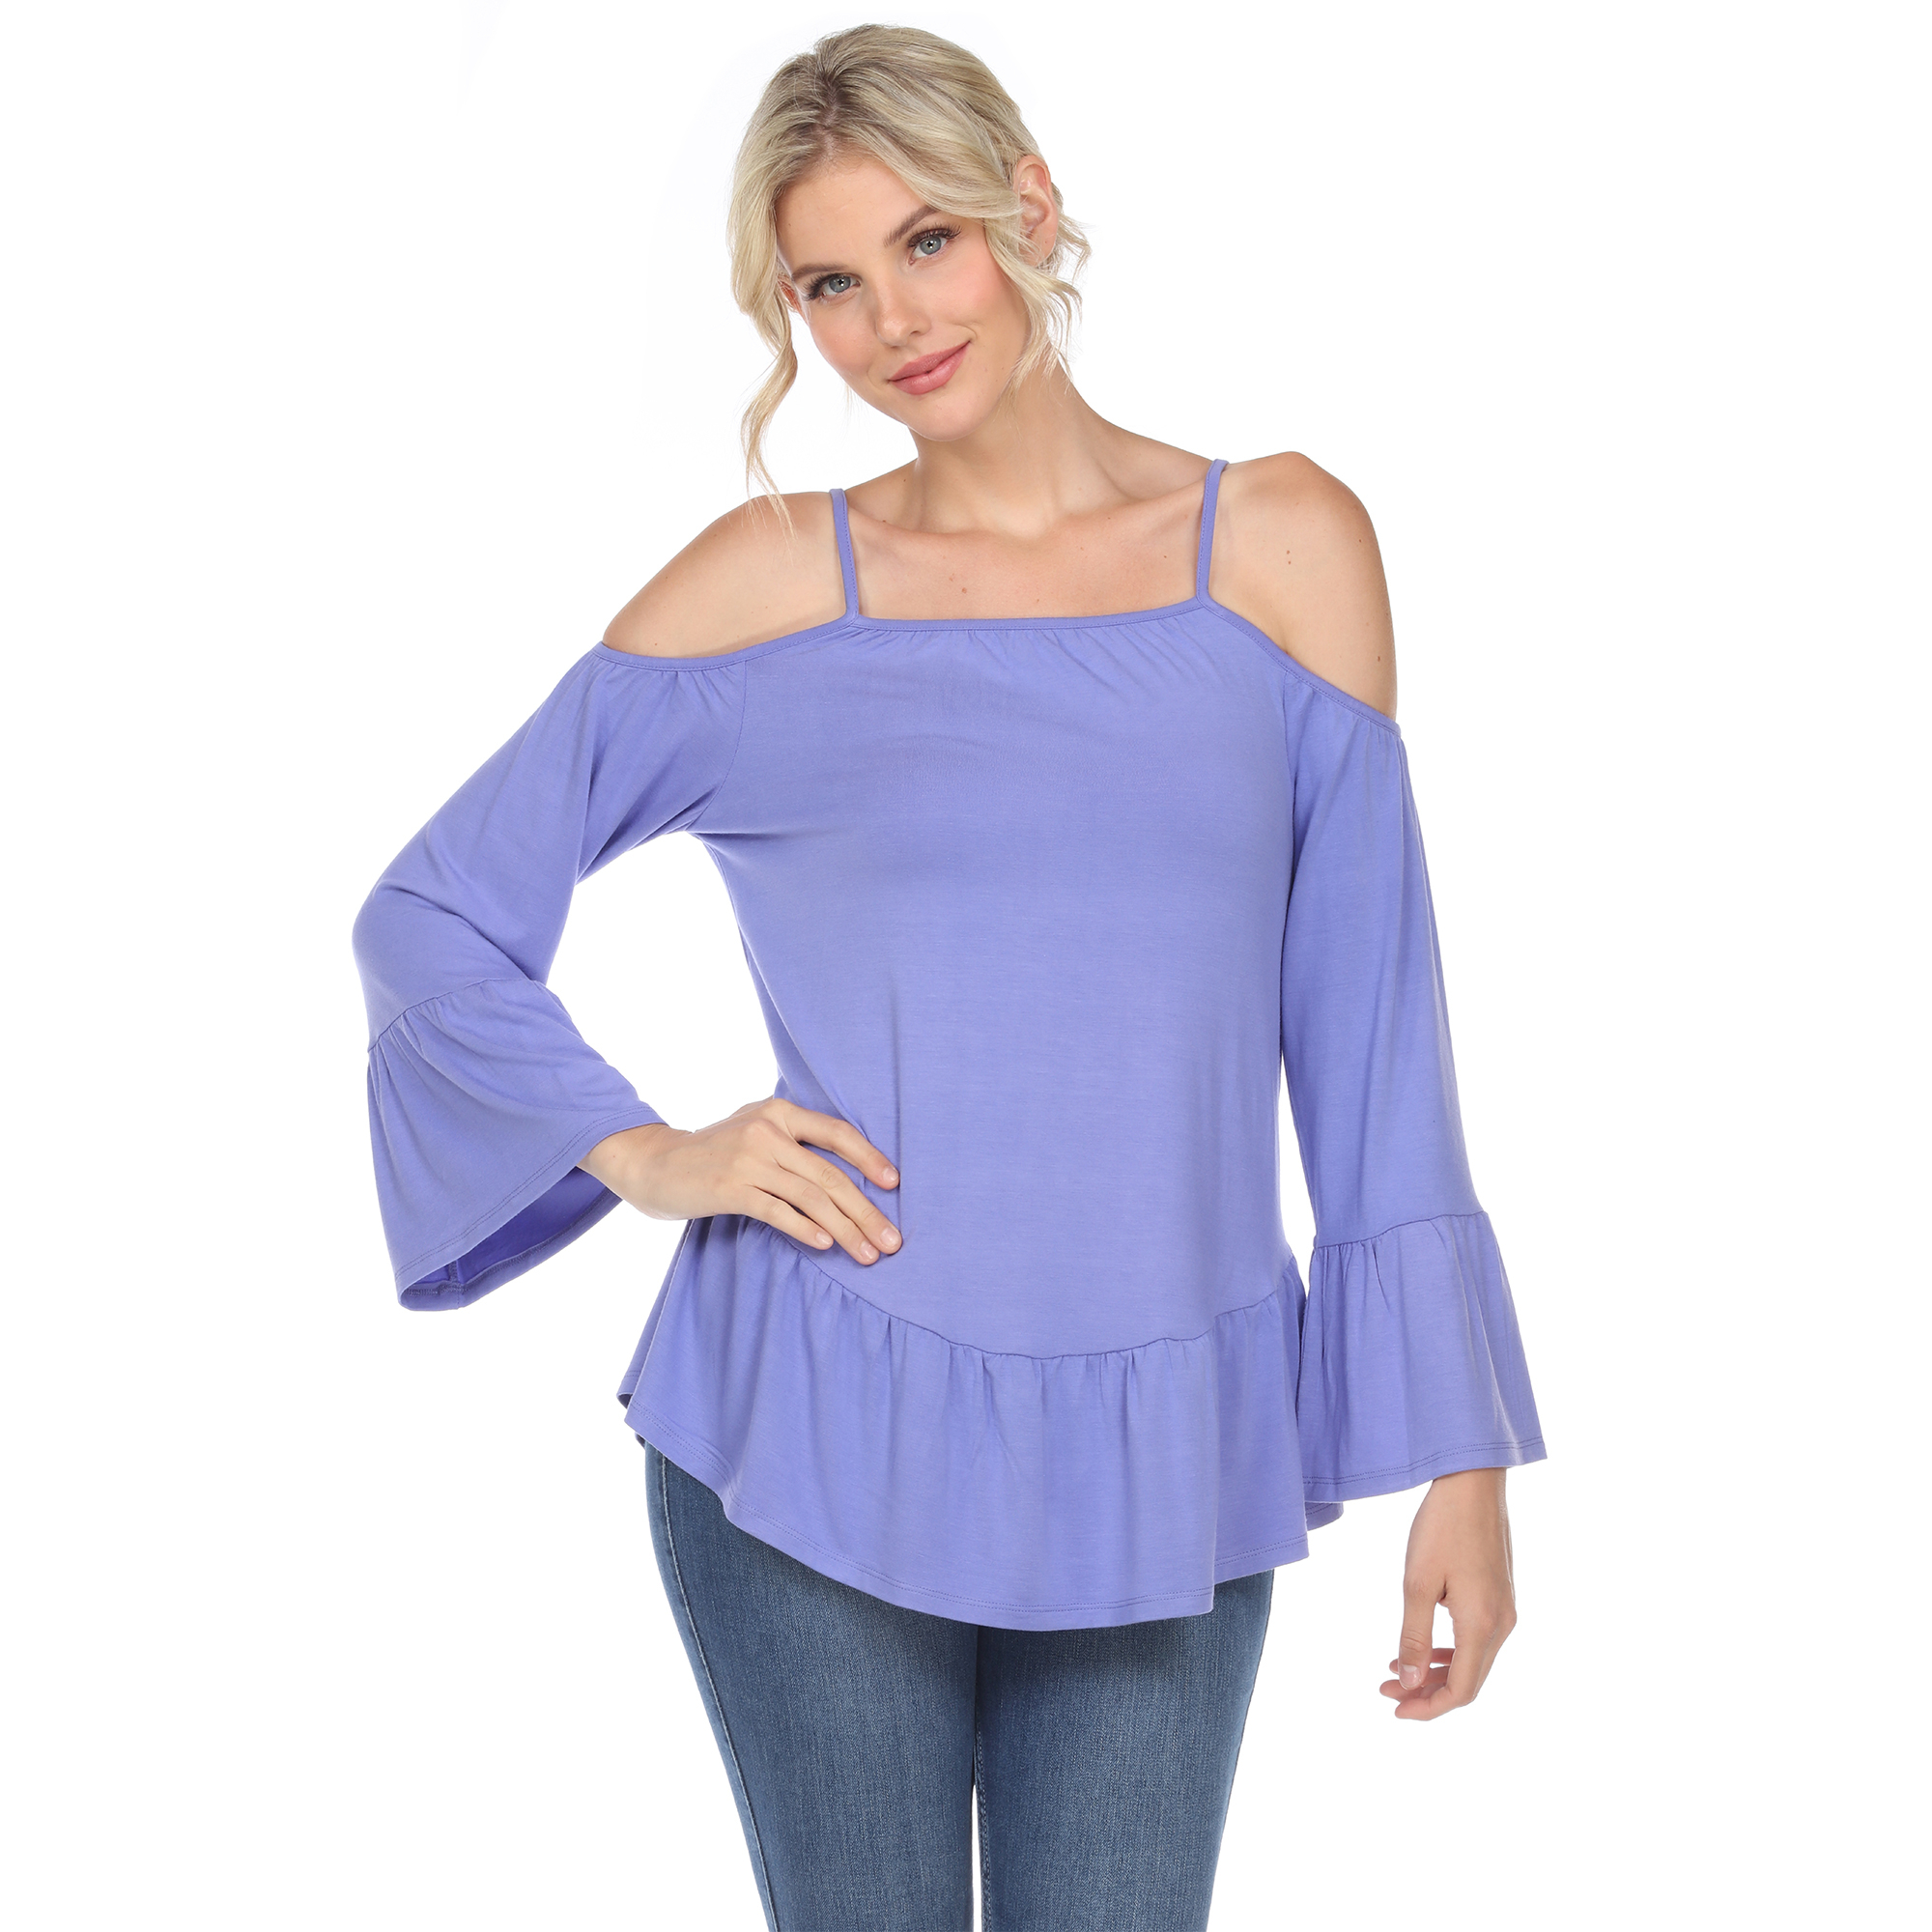 White Mark Women's Cold Shoulder Ruffle Sleeve Top - Purple, X-Large